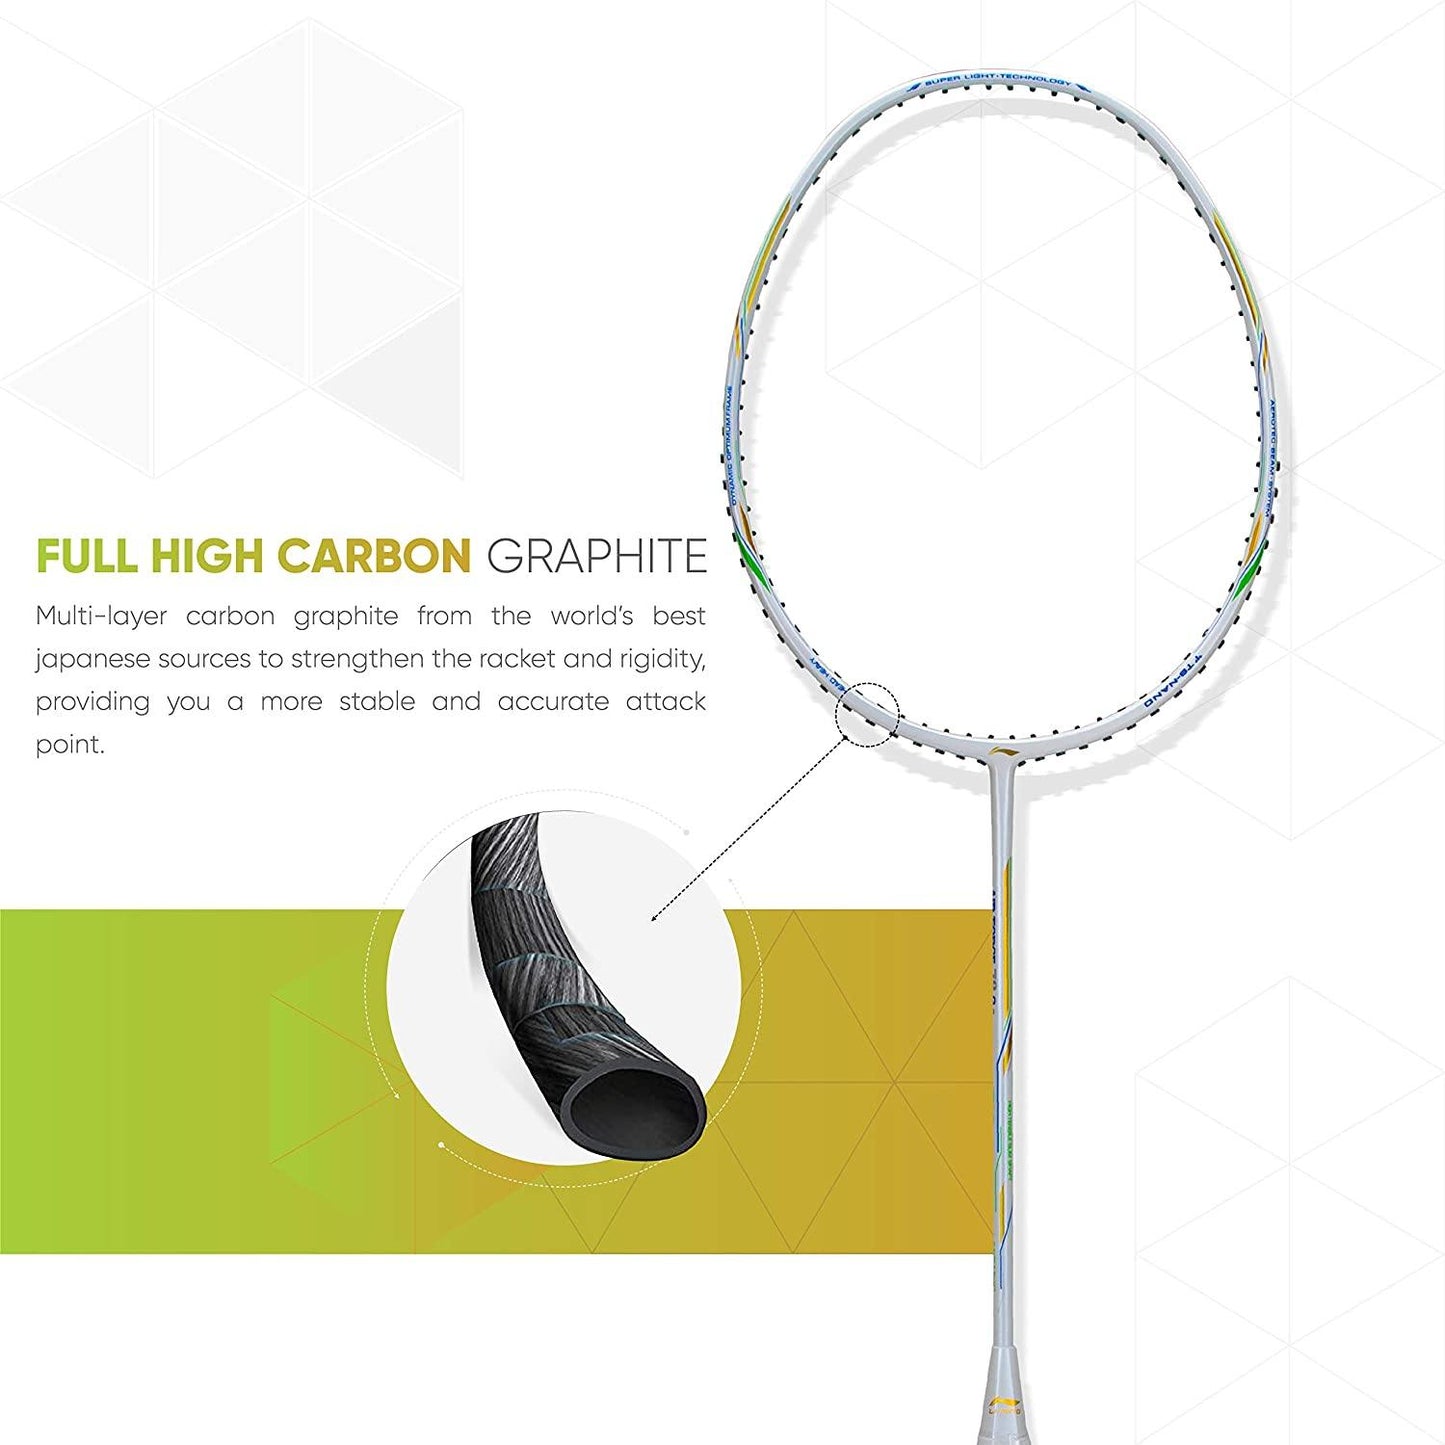 Li-Ning Air Force 78 G2 Carbon Fibre Badminton Racket with Free Full Cover White/Gold - Best Price online Prokicksports.com